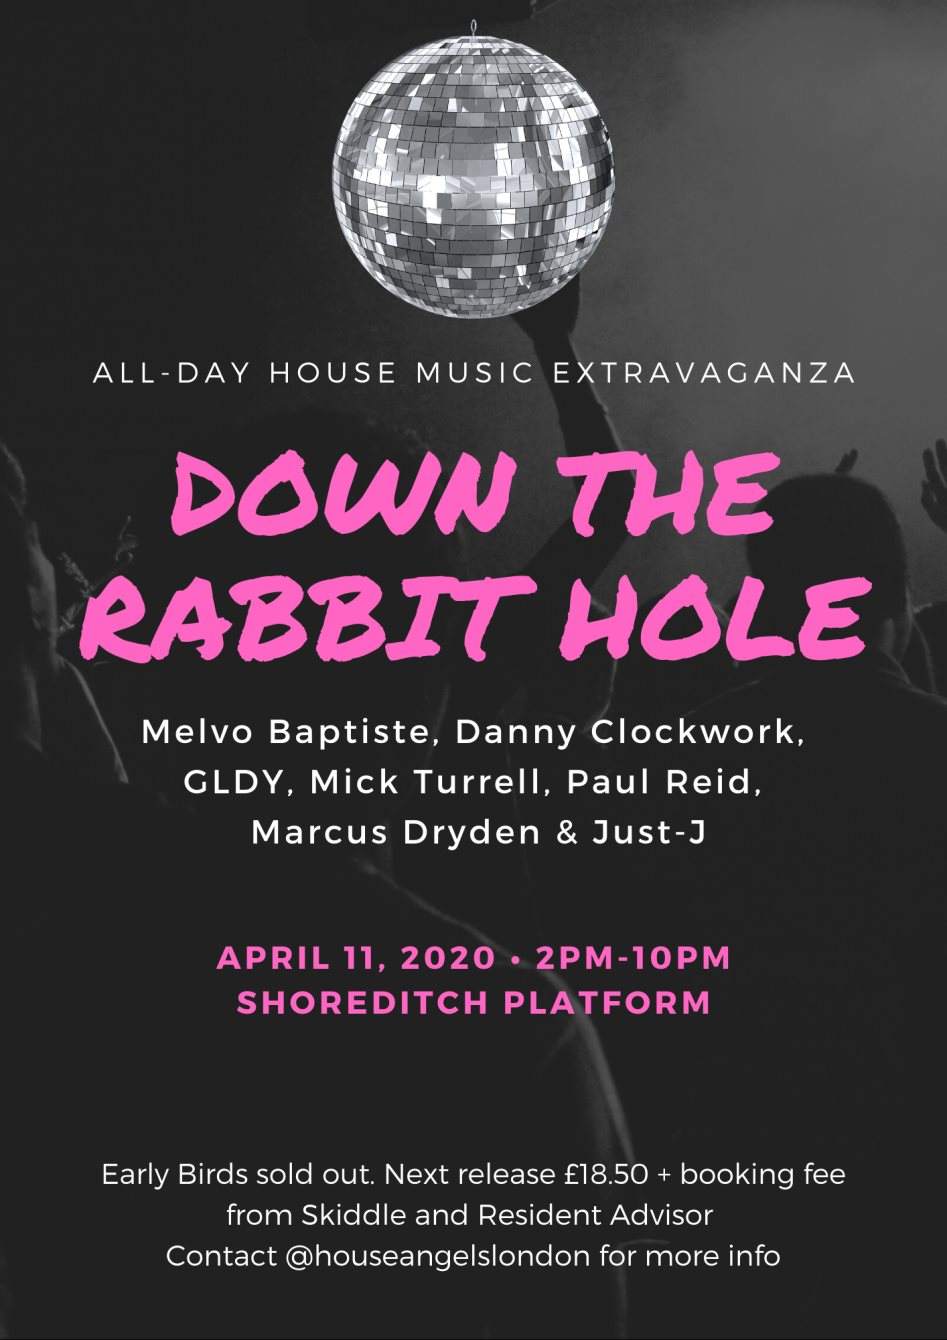 [CANCELLED] House Angels presents 'Down the Rabbit Hole' - フライヤー表